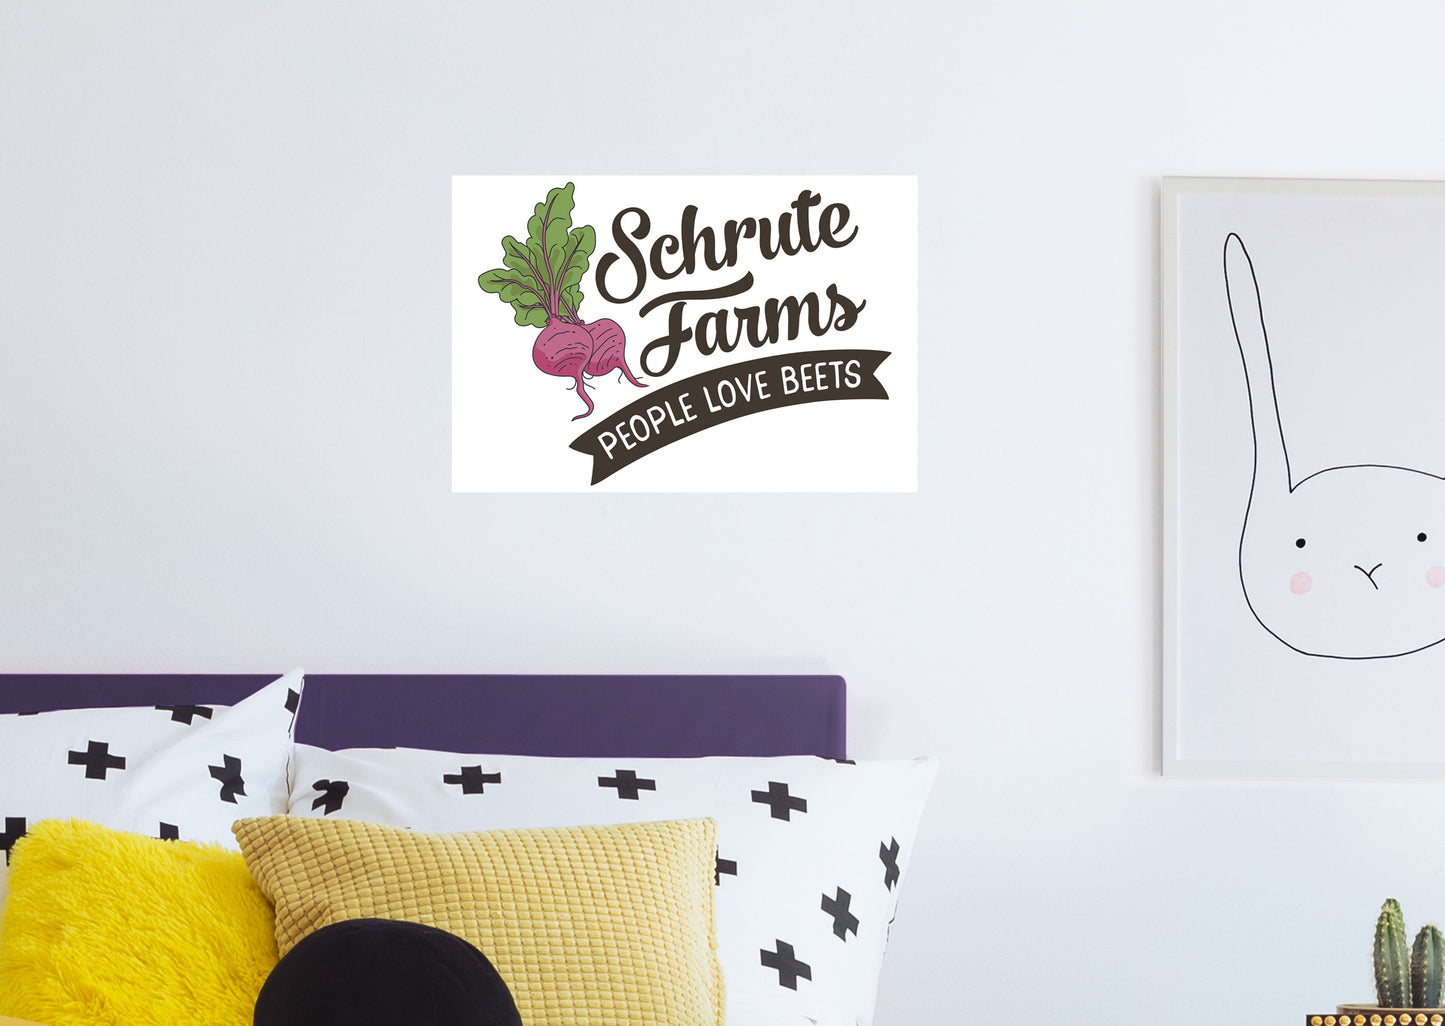 The Office: Schrute Farms Mural        - Officially Licensed NBC Universal Removable Wall   Adhesive Decal